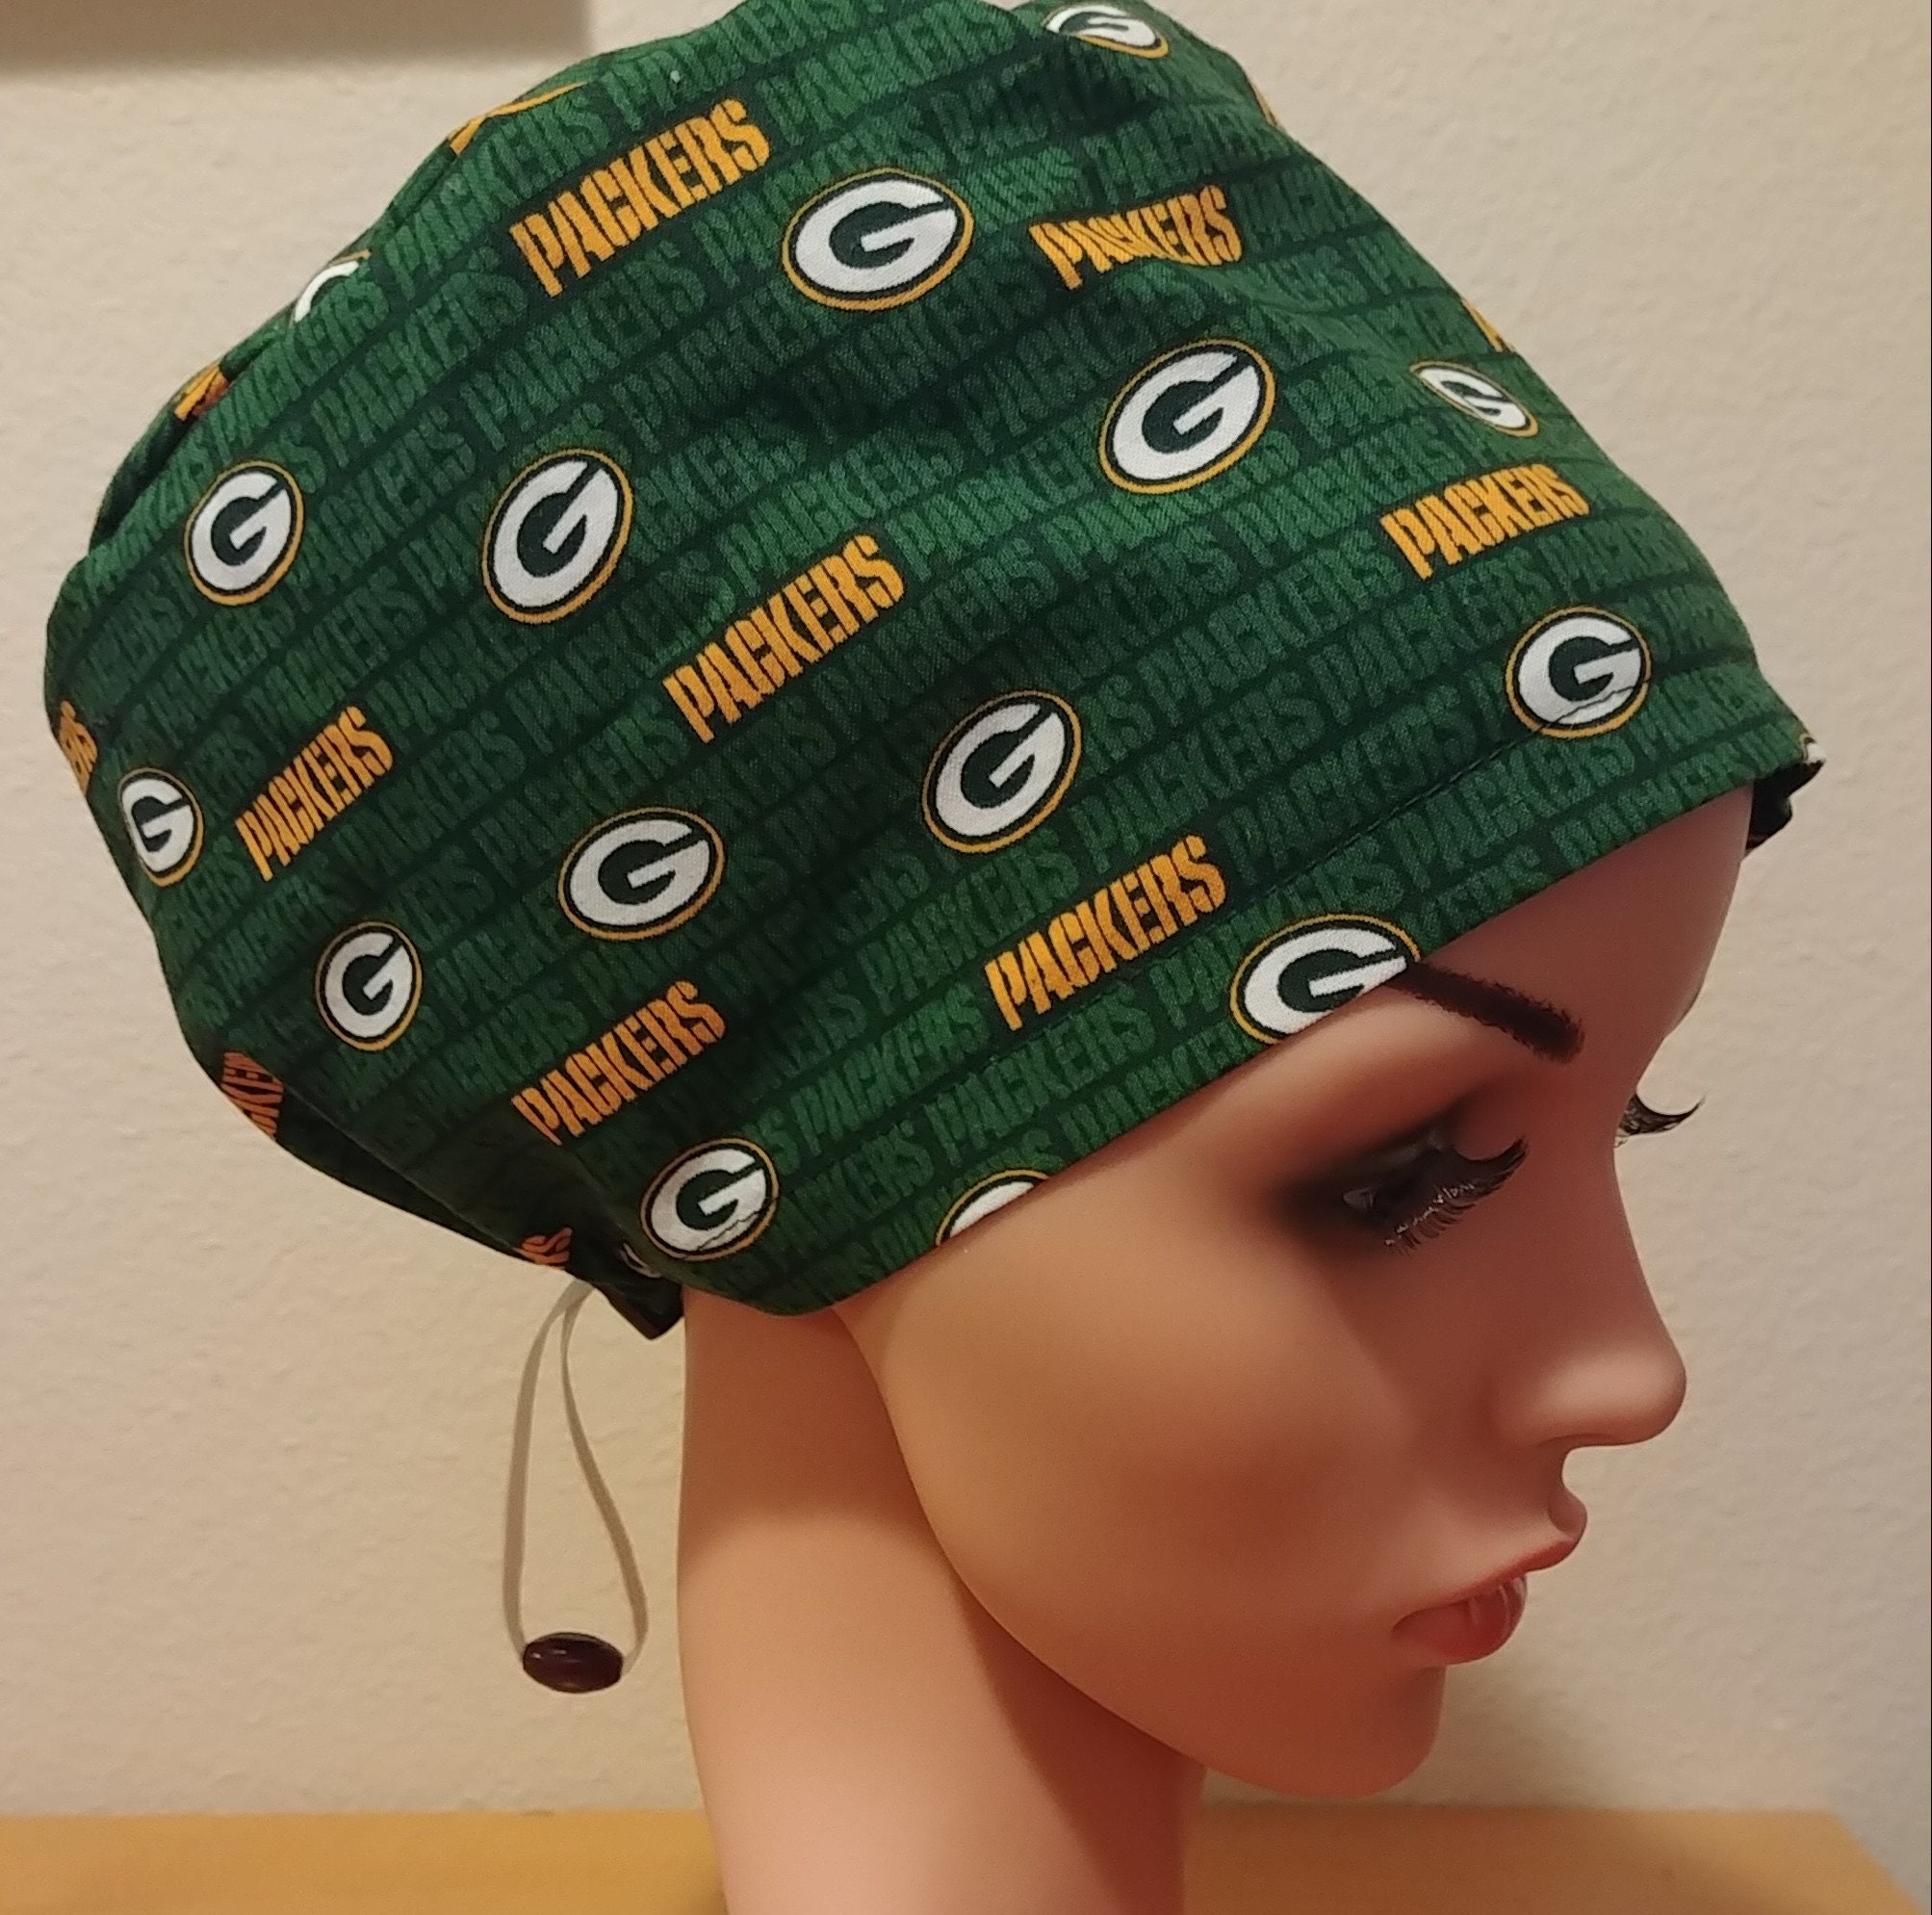 Women's Surgical Cap, Scrub Hat, Chemo Cap, NFL Green Bay Packers